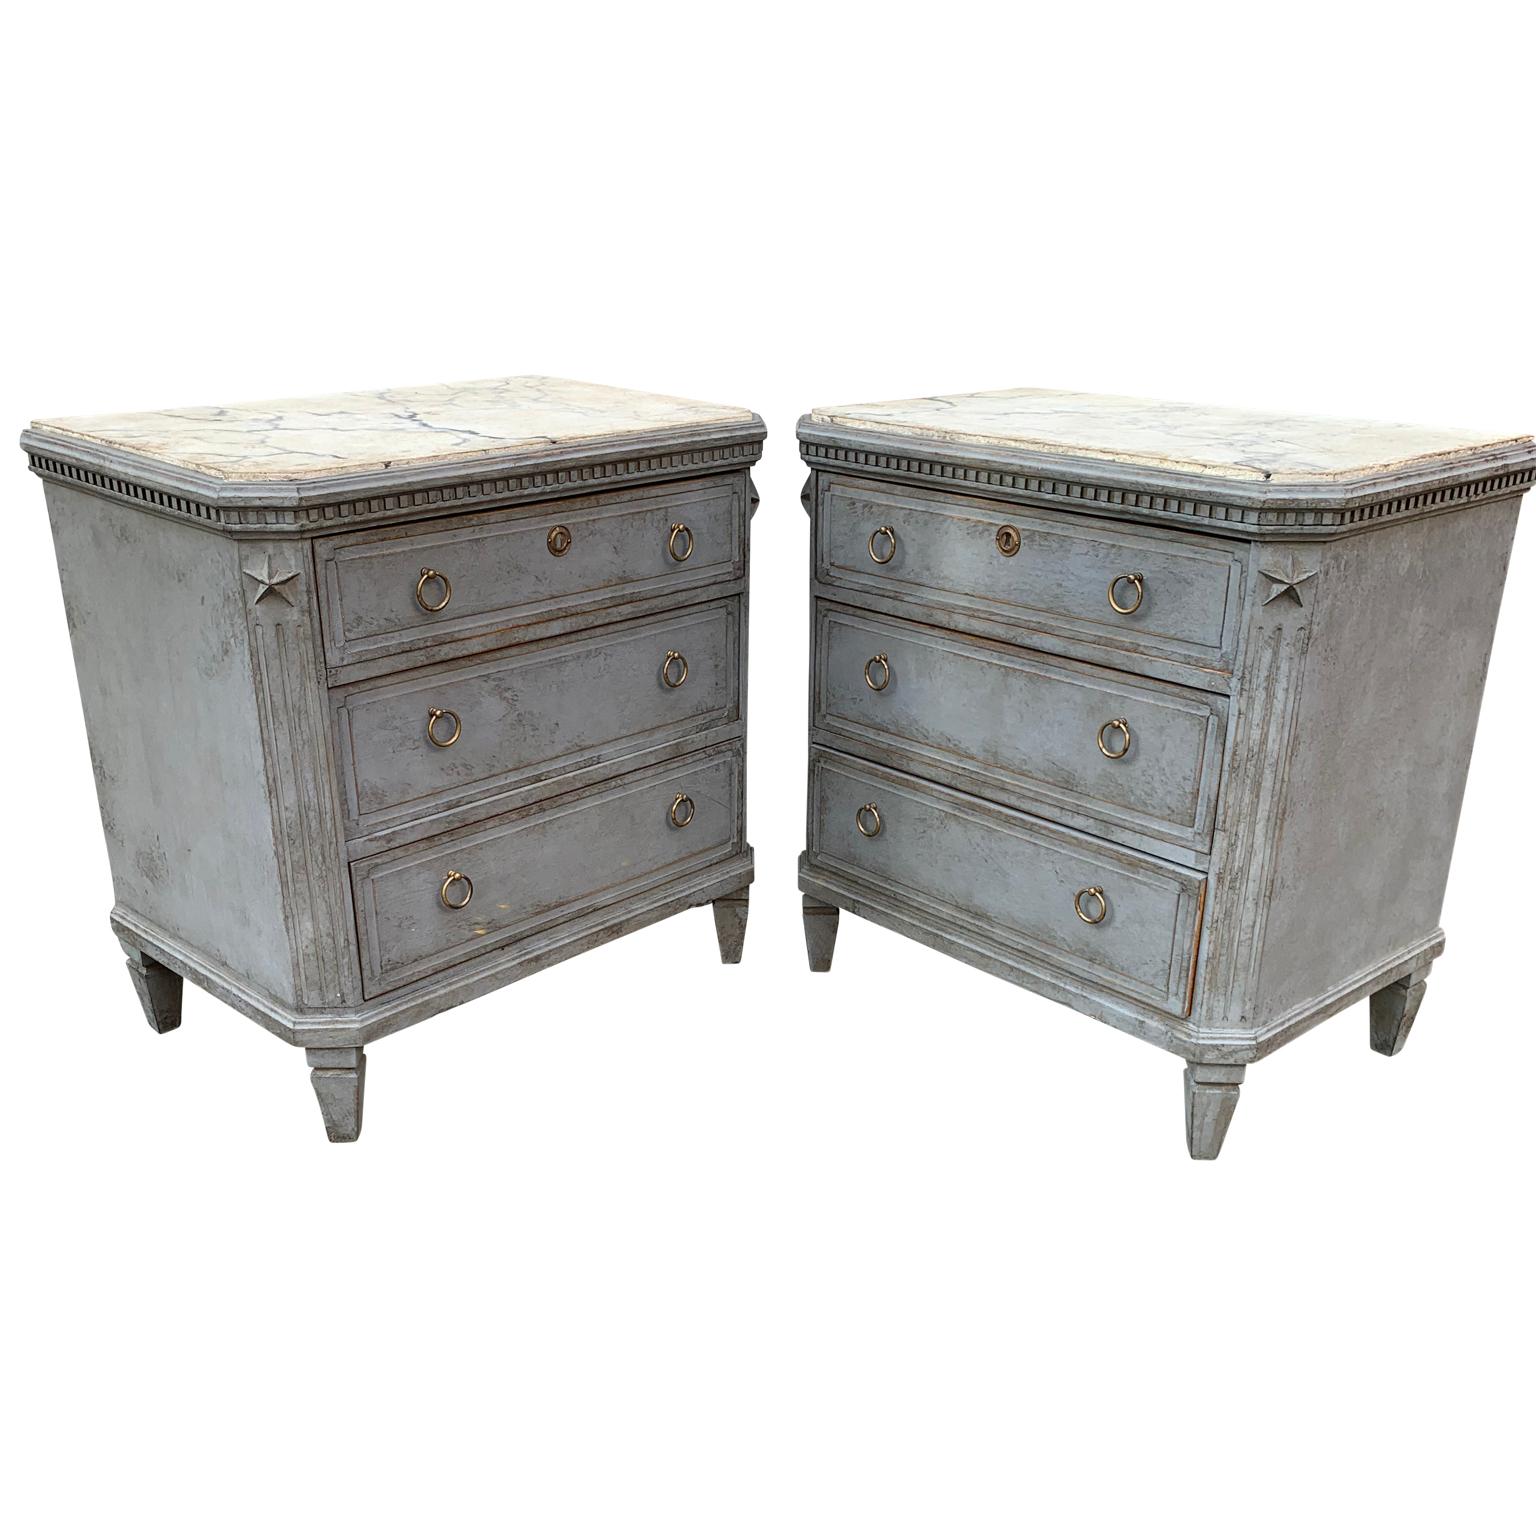 20th Century Swedish Pair of Painted Faux Marble Top Gustavian Style Dressers